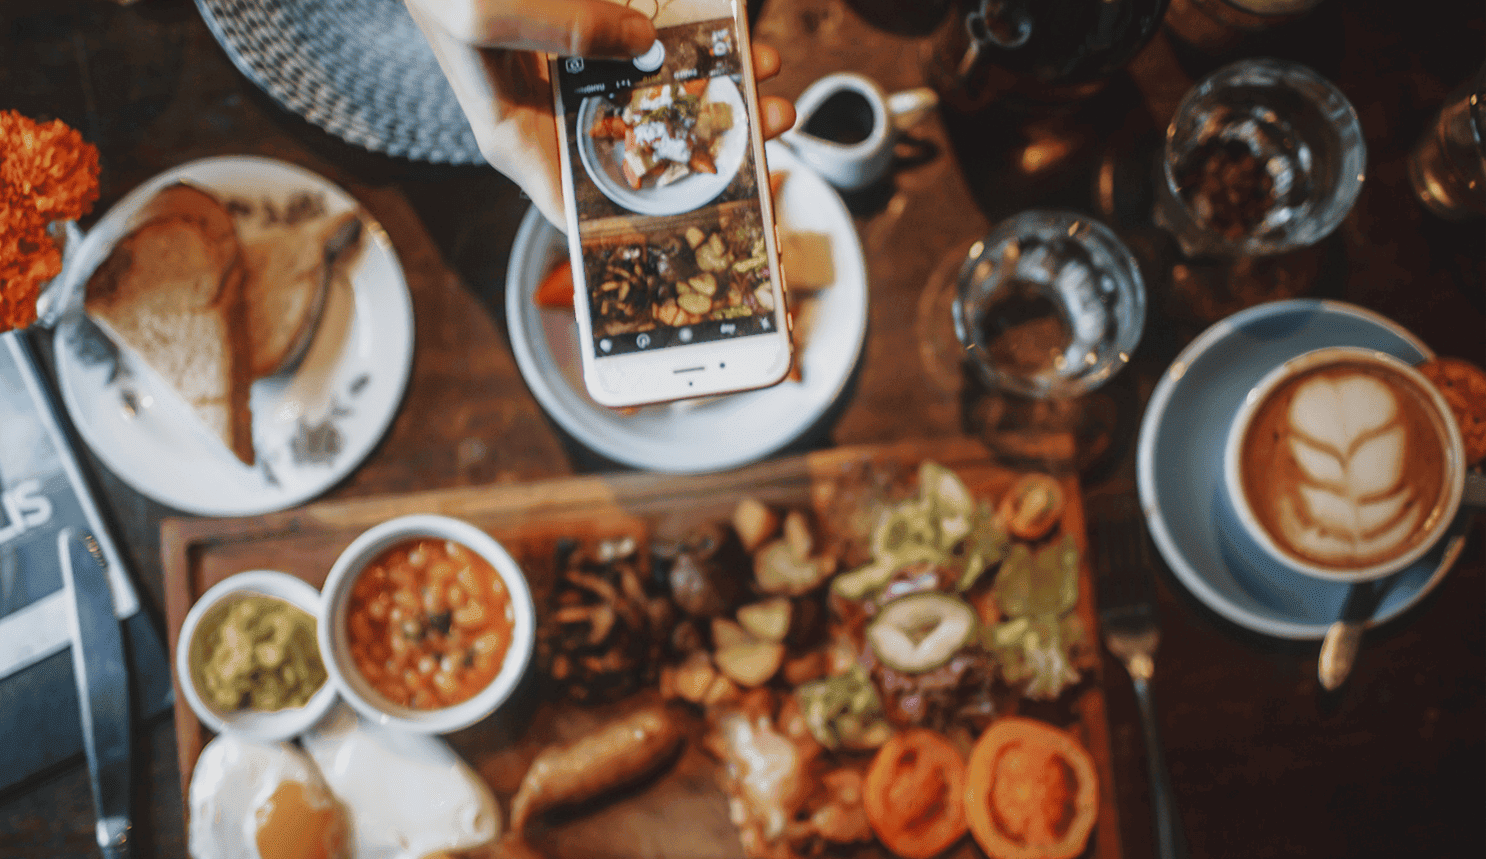 Guide: How To Promote Your Restaurant's Online Ordering